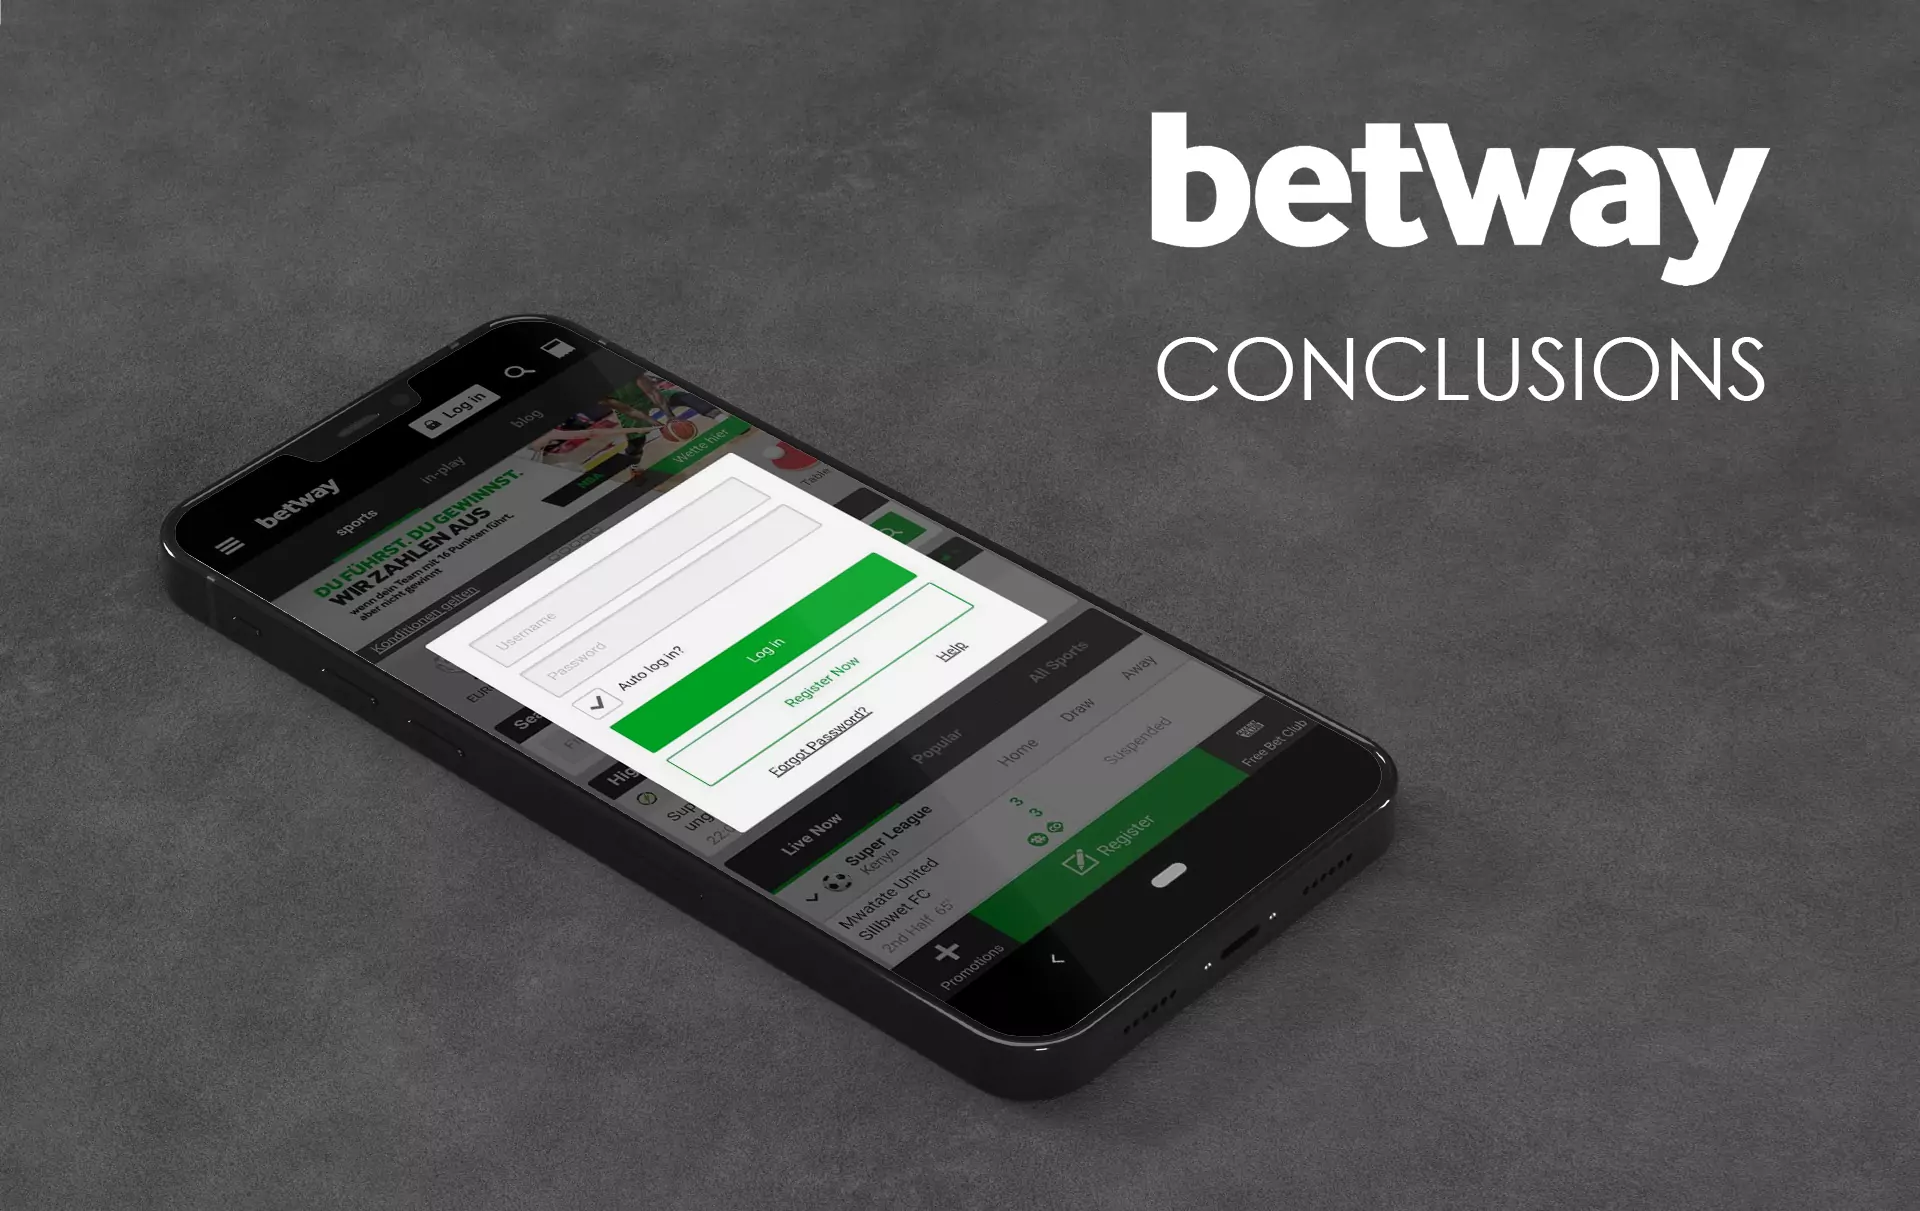 Read the conclusions of the Betway app review for Indian users.